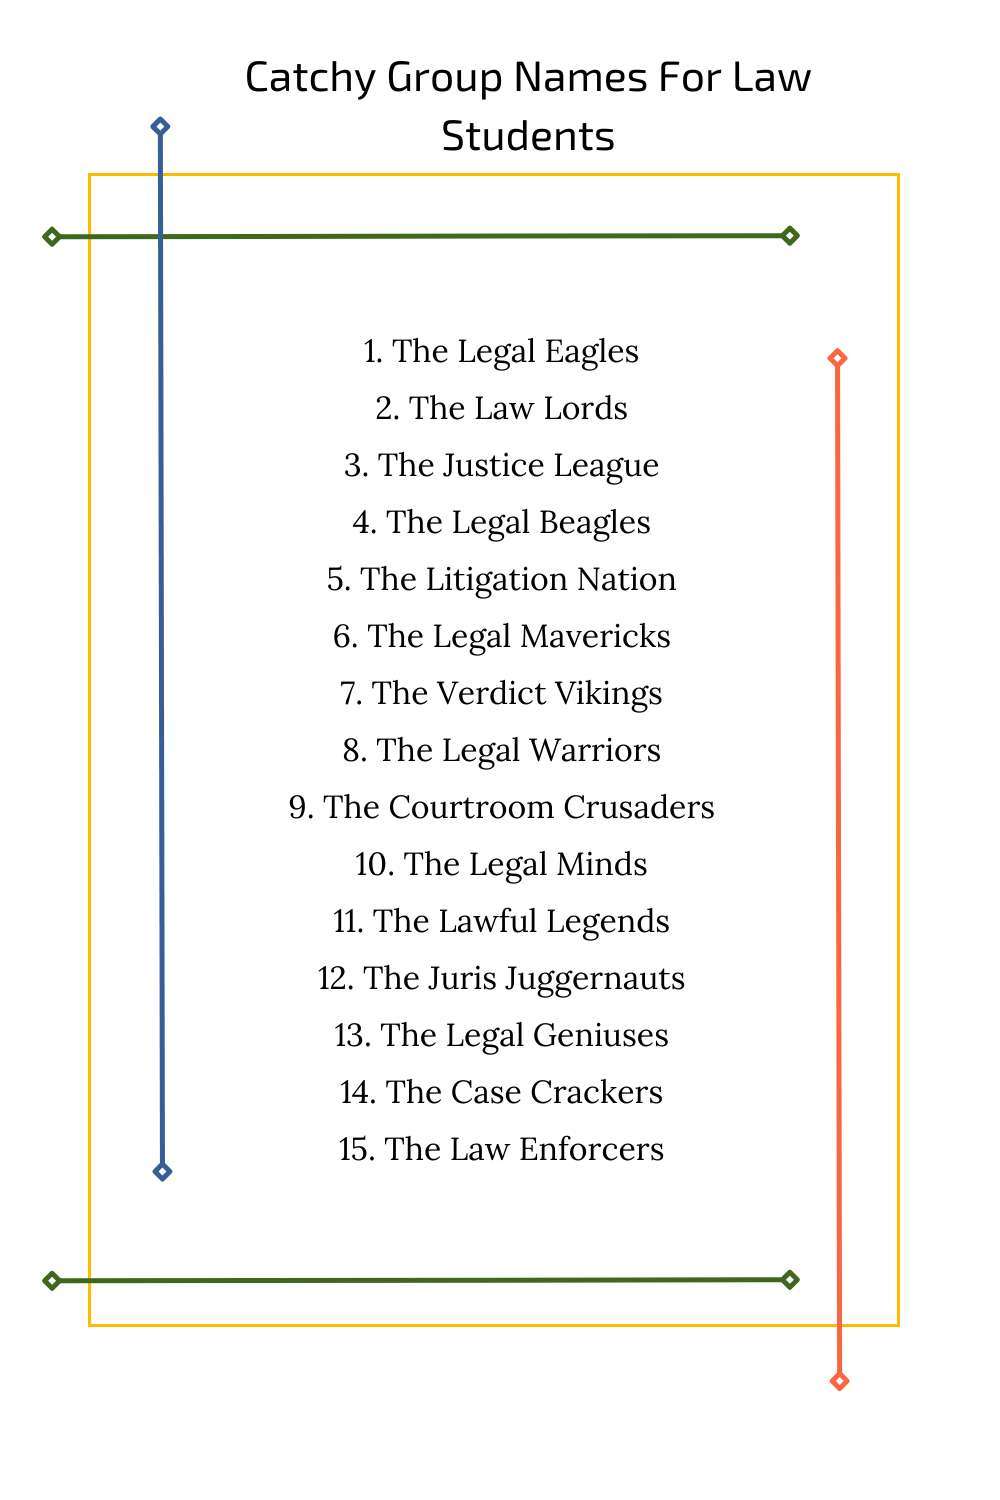 Catchy Group Names For Law Students